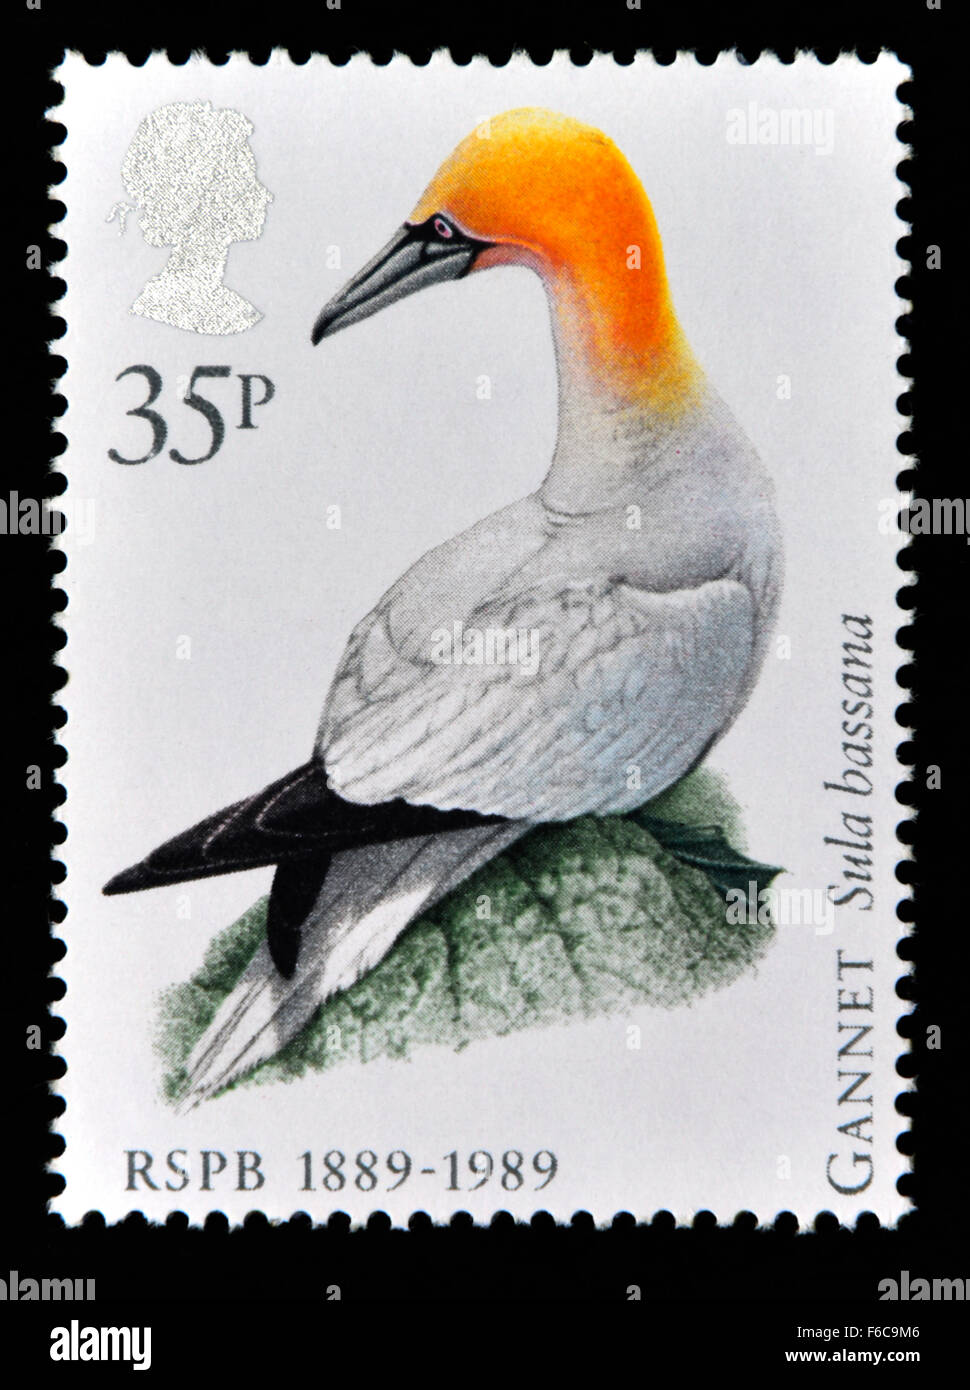 Postage stamp. Great Britain. Queen Elizabeth II. 1989. Centenary of Royal Society for the Protection of Birds. 1889-1989. Stock Photo